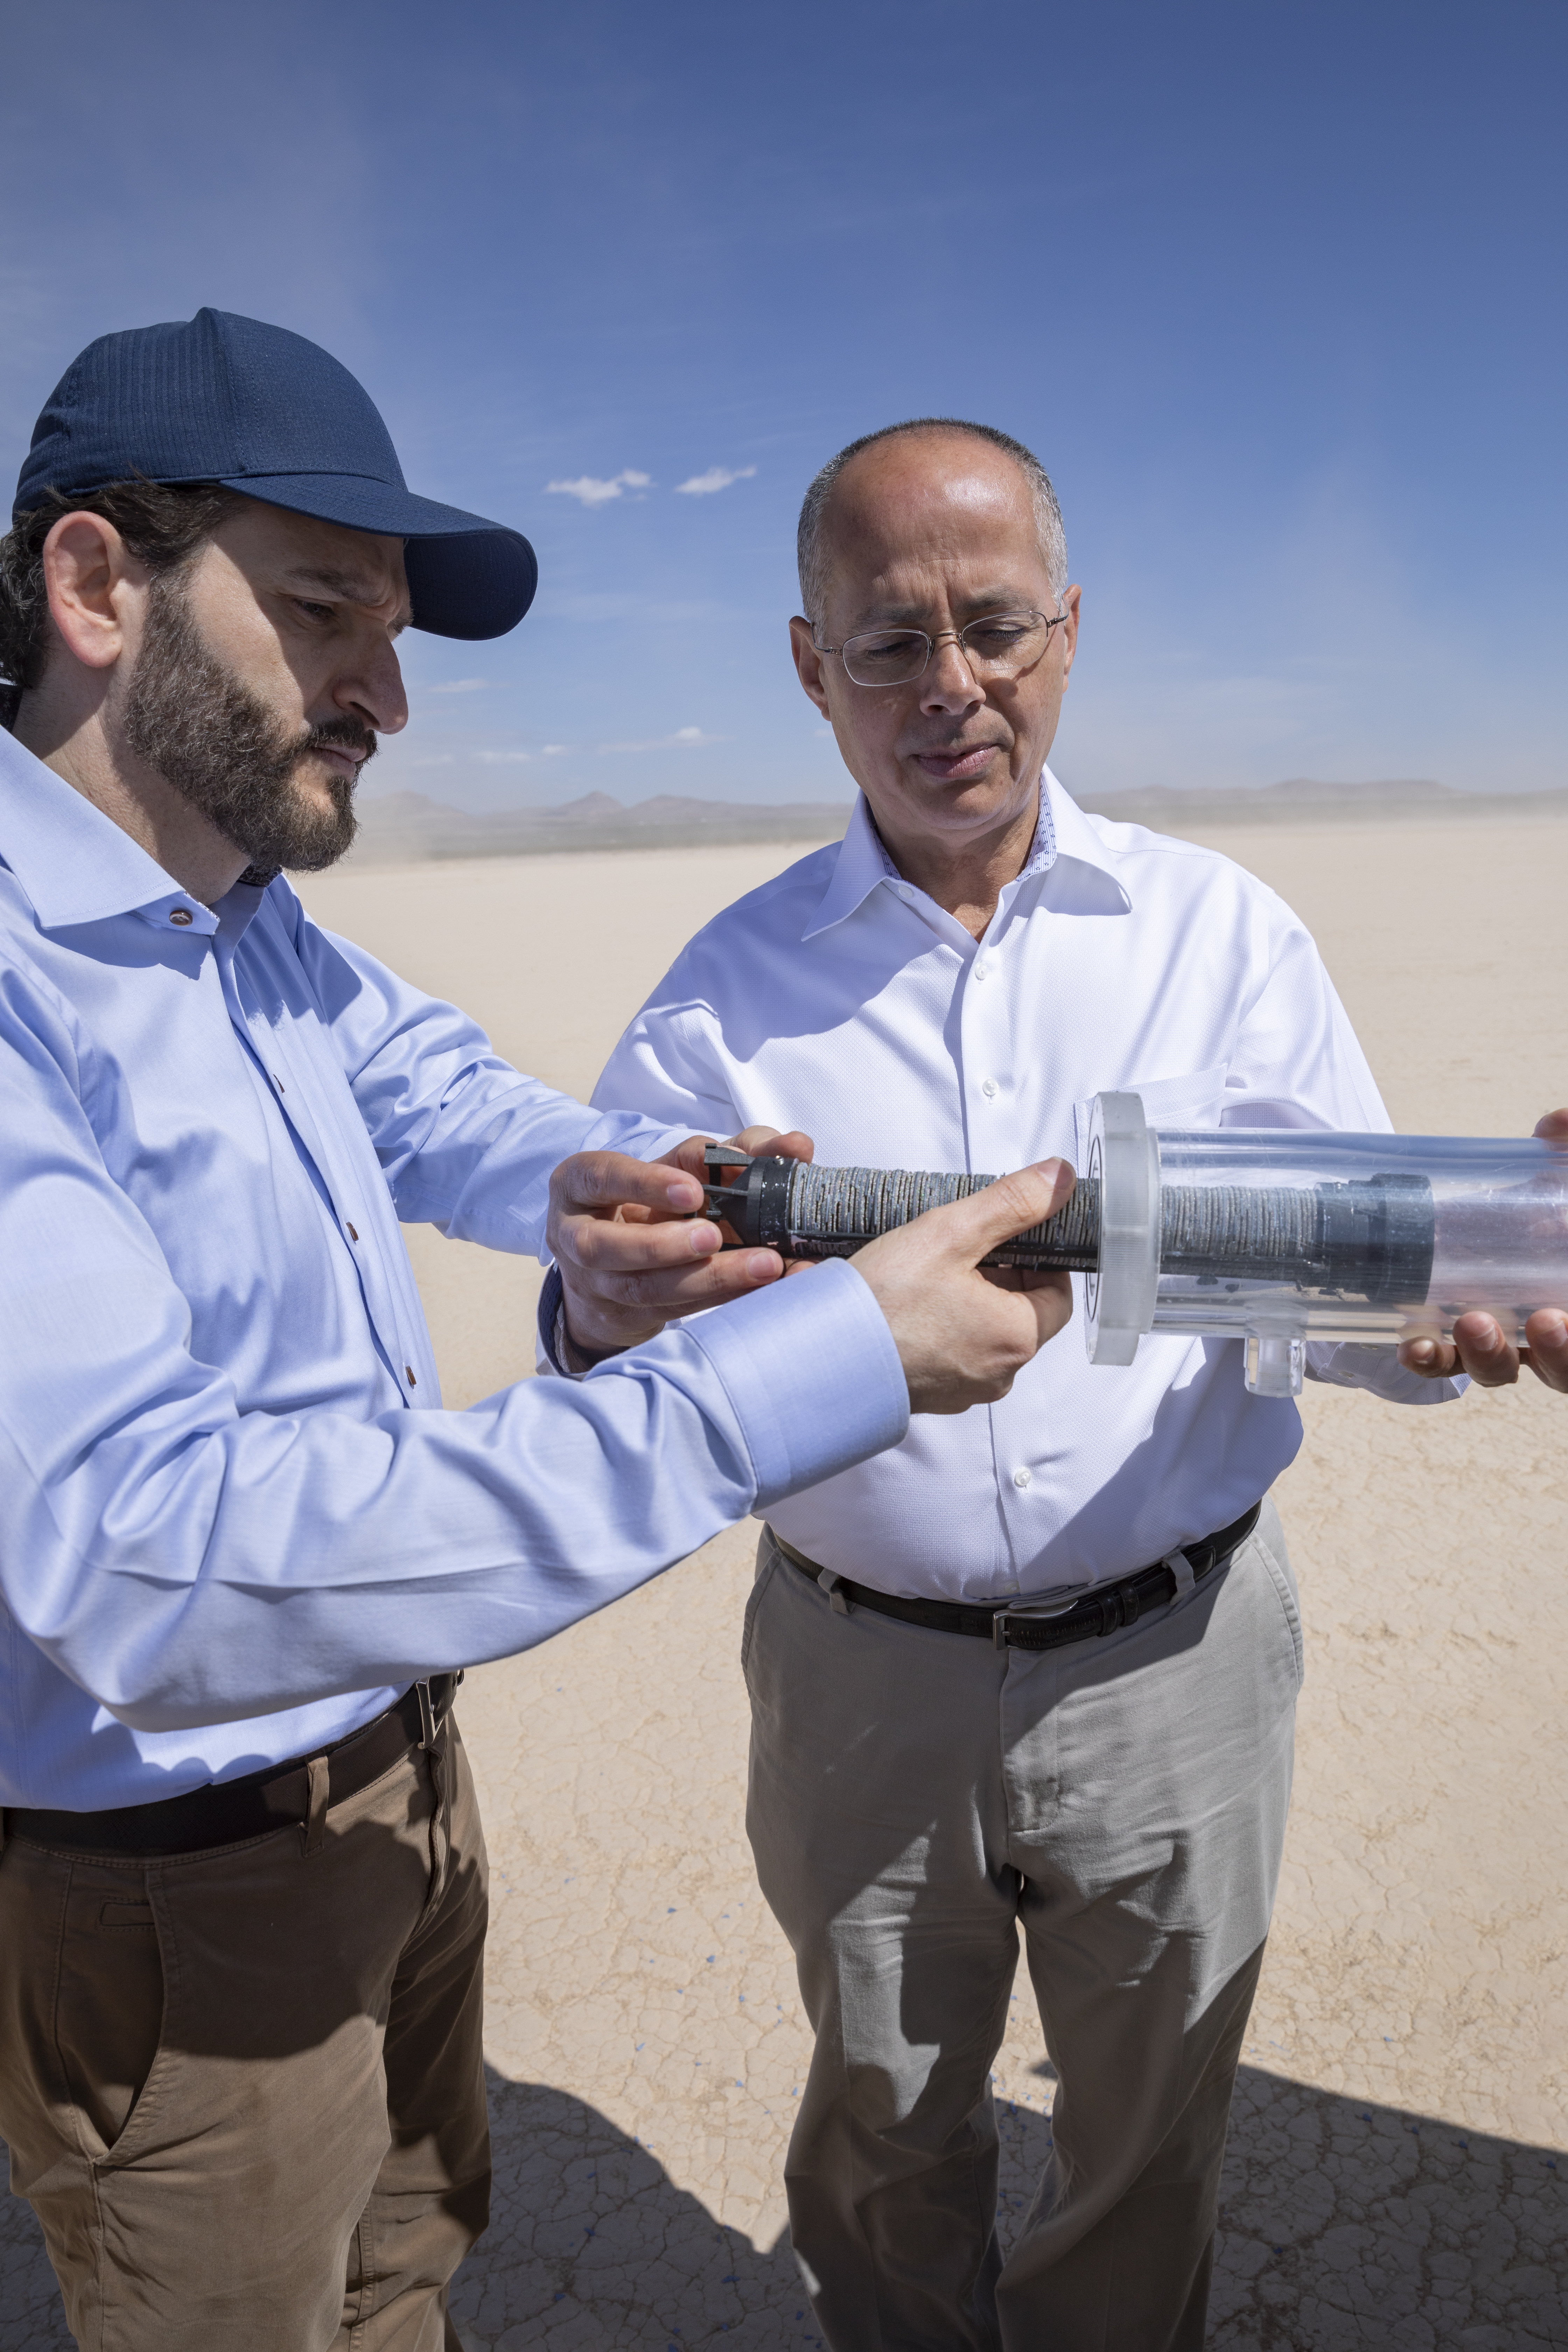 Omar Yaghi and Samer Taha with one of their water harvesting prototypes. (David Huff—Courtesy of Atoco)